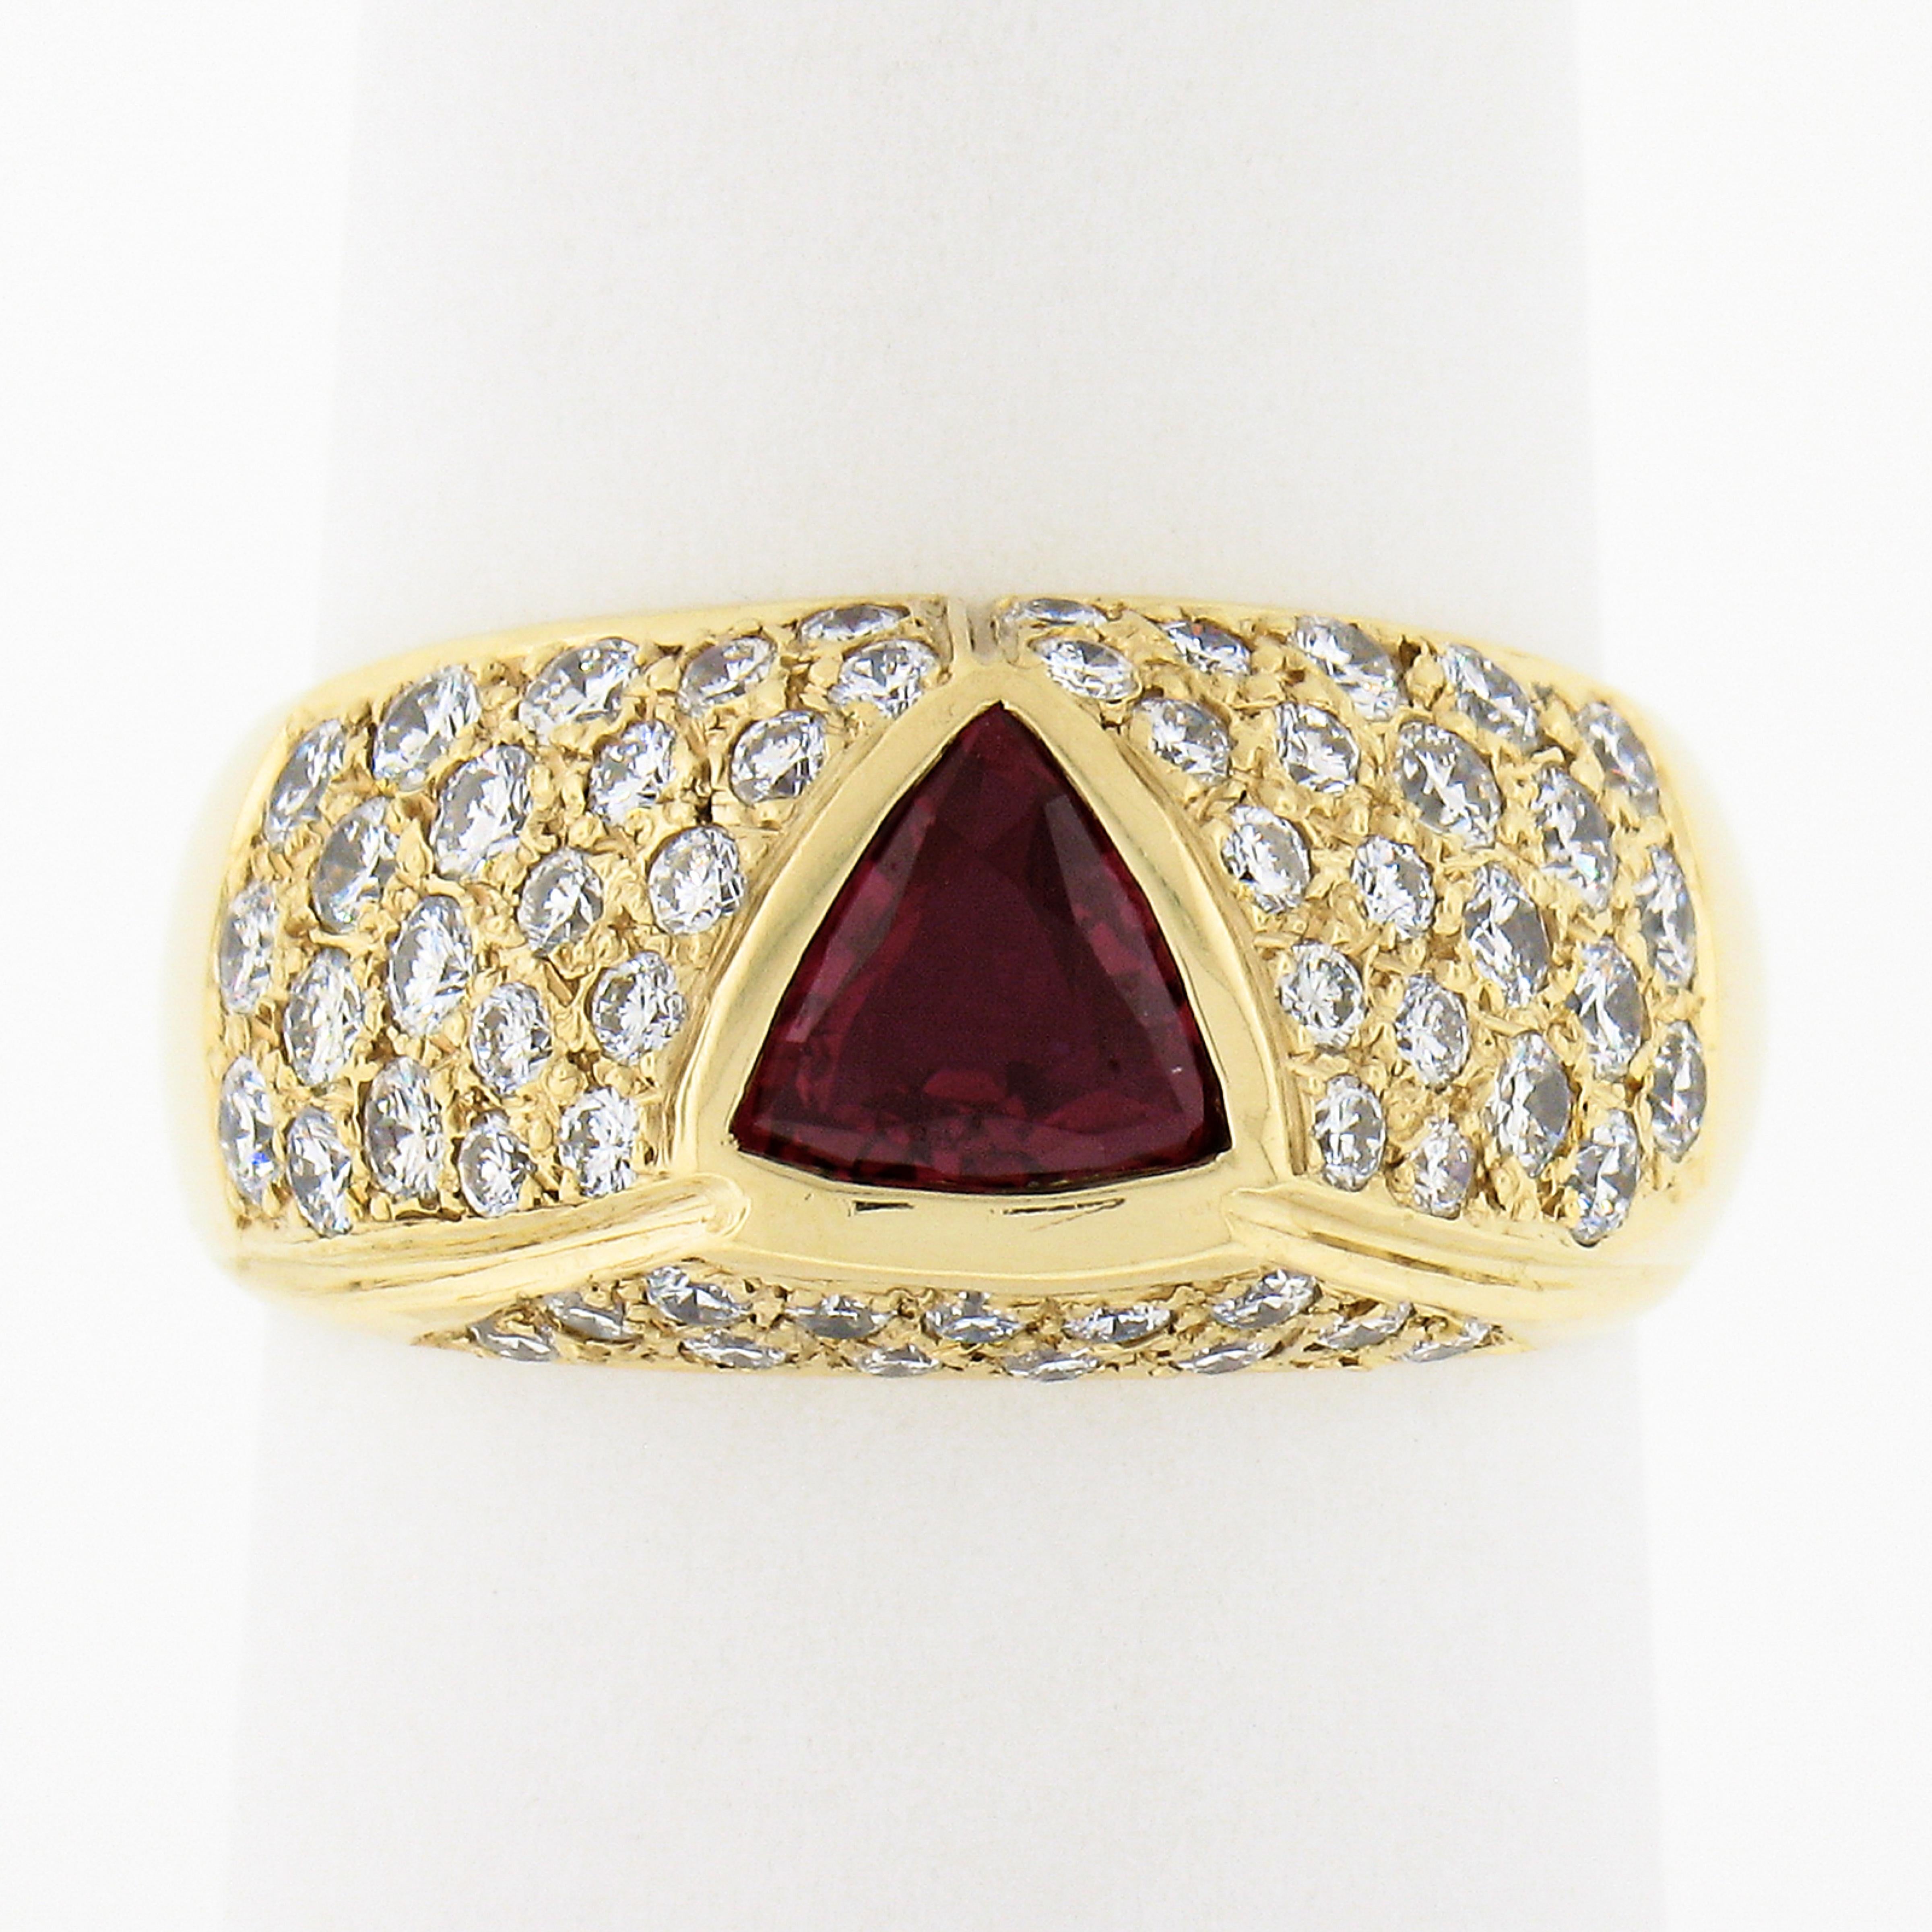 This incredible band ring is crafted in solid 18k yellow gold and features a GIA certified natural ruby neatly bezel set at the center. The ruby has a lovely triangular cut and shows a gorgeous vivid red color with amazing amount of shine due to its